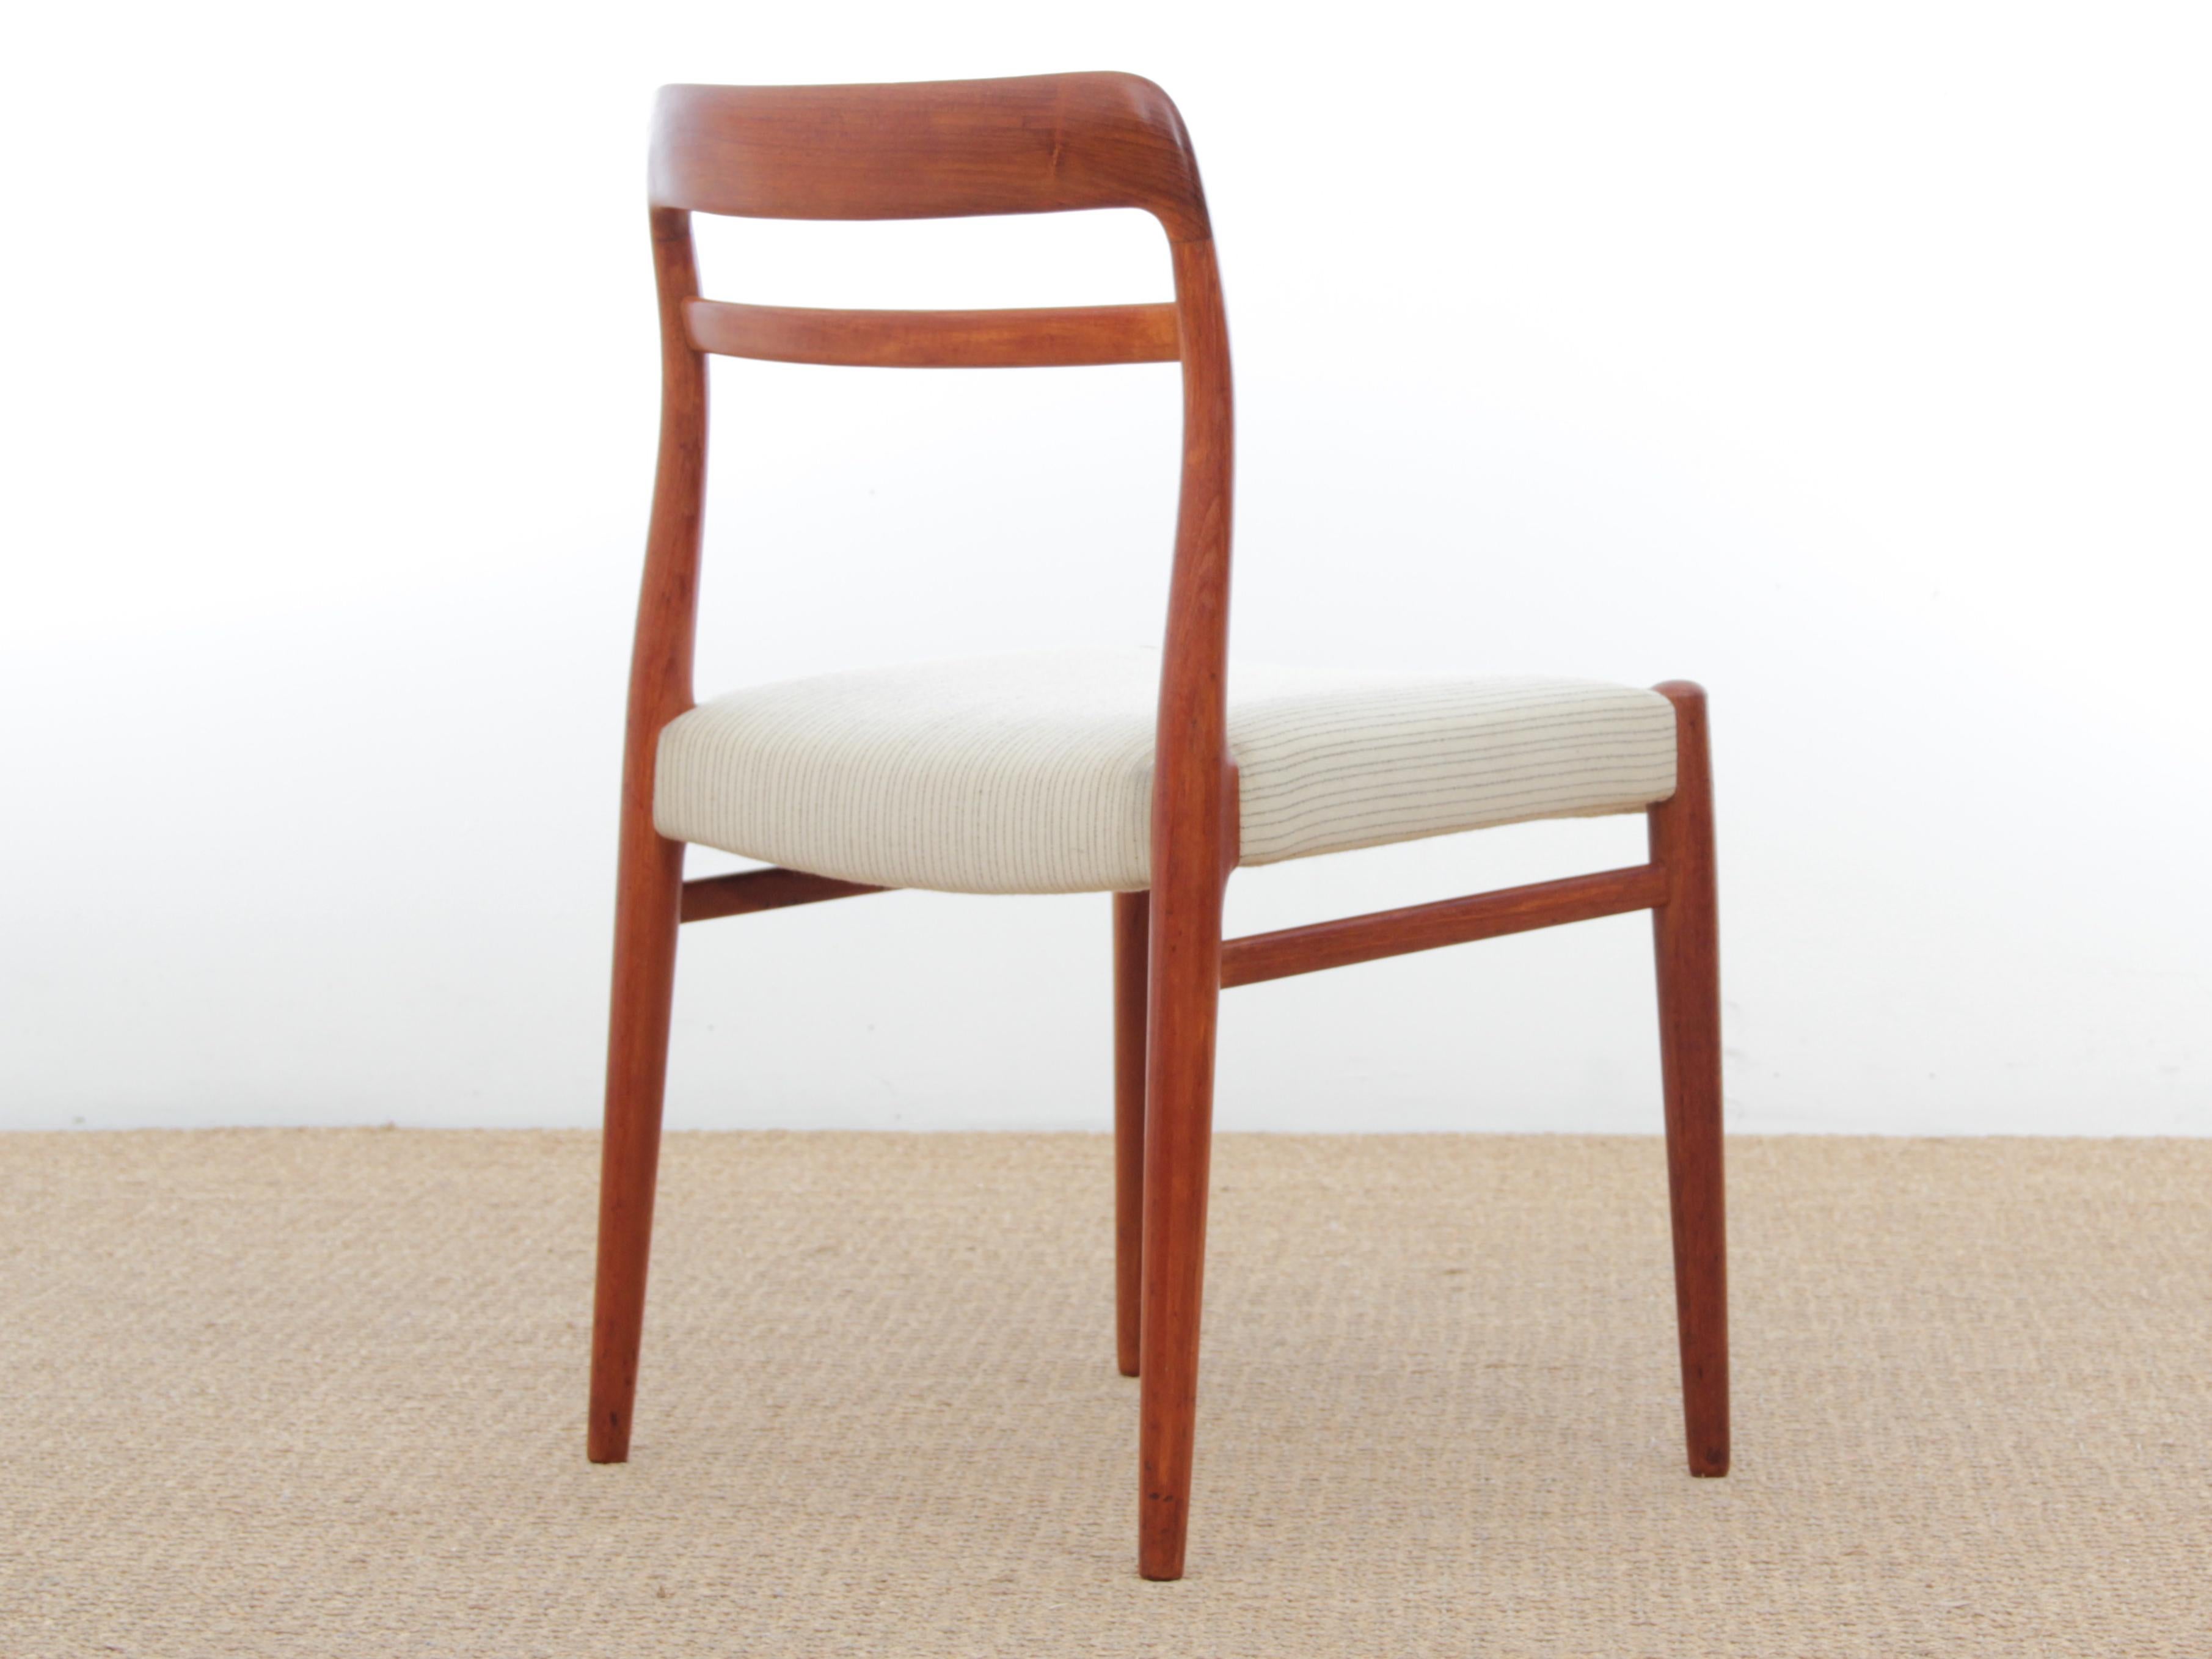 Mid-20th Century Mid-Century Modern Danish Dining Chairs in Teak For Sale